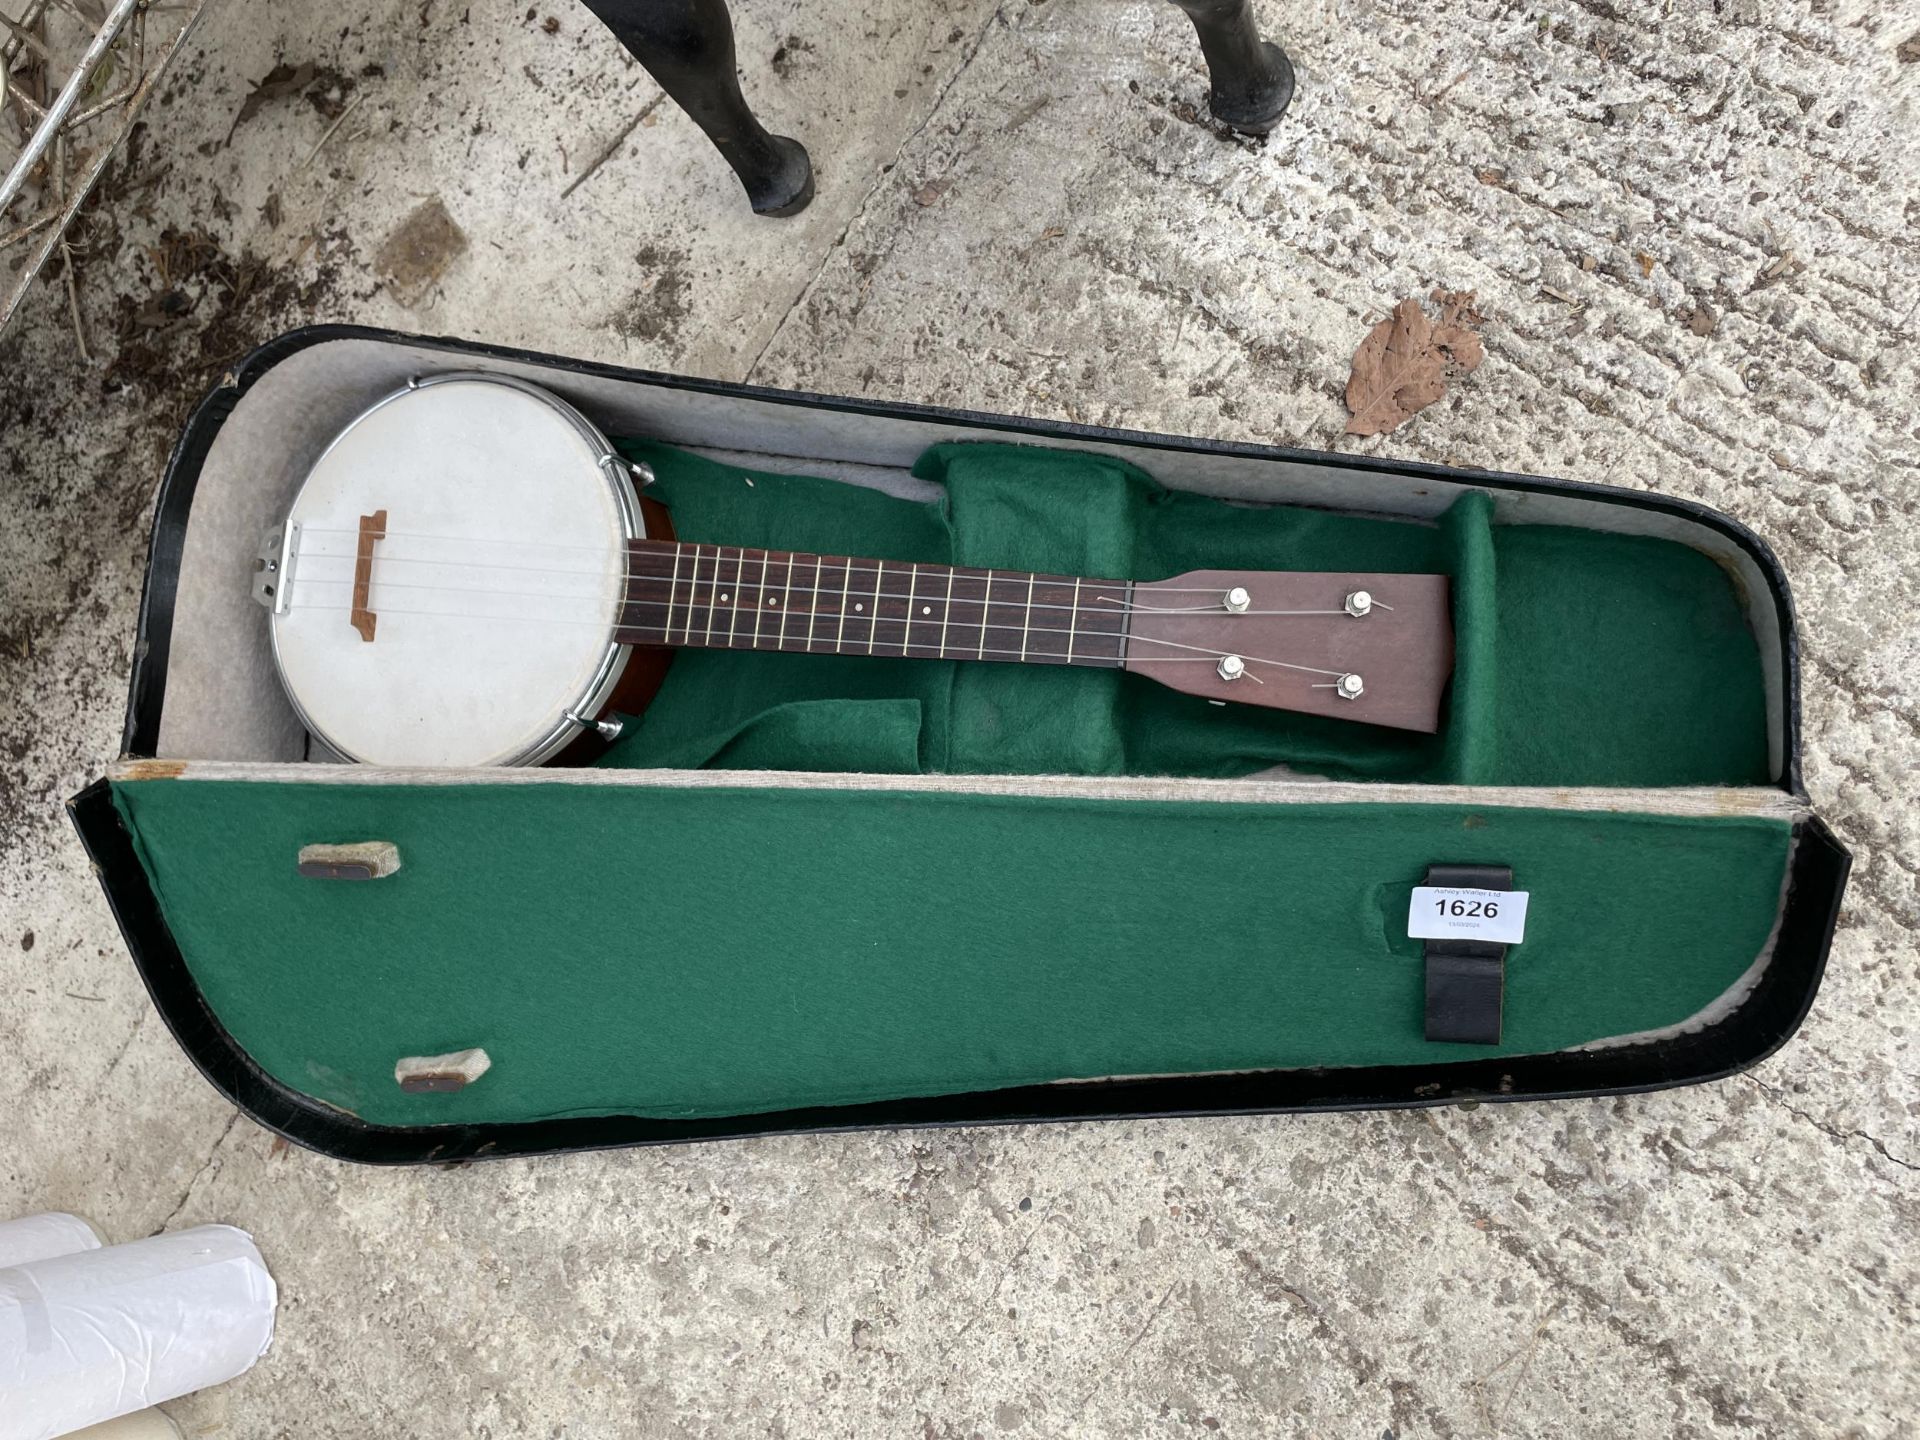 A VINTAGE BANJO WITH CARRY CASE